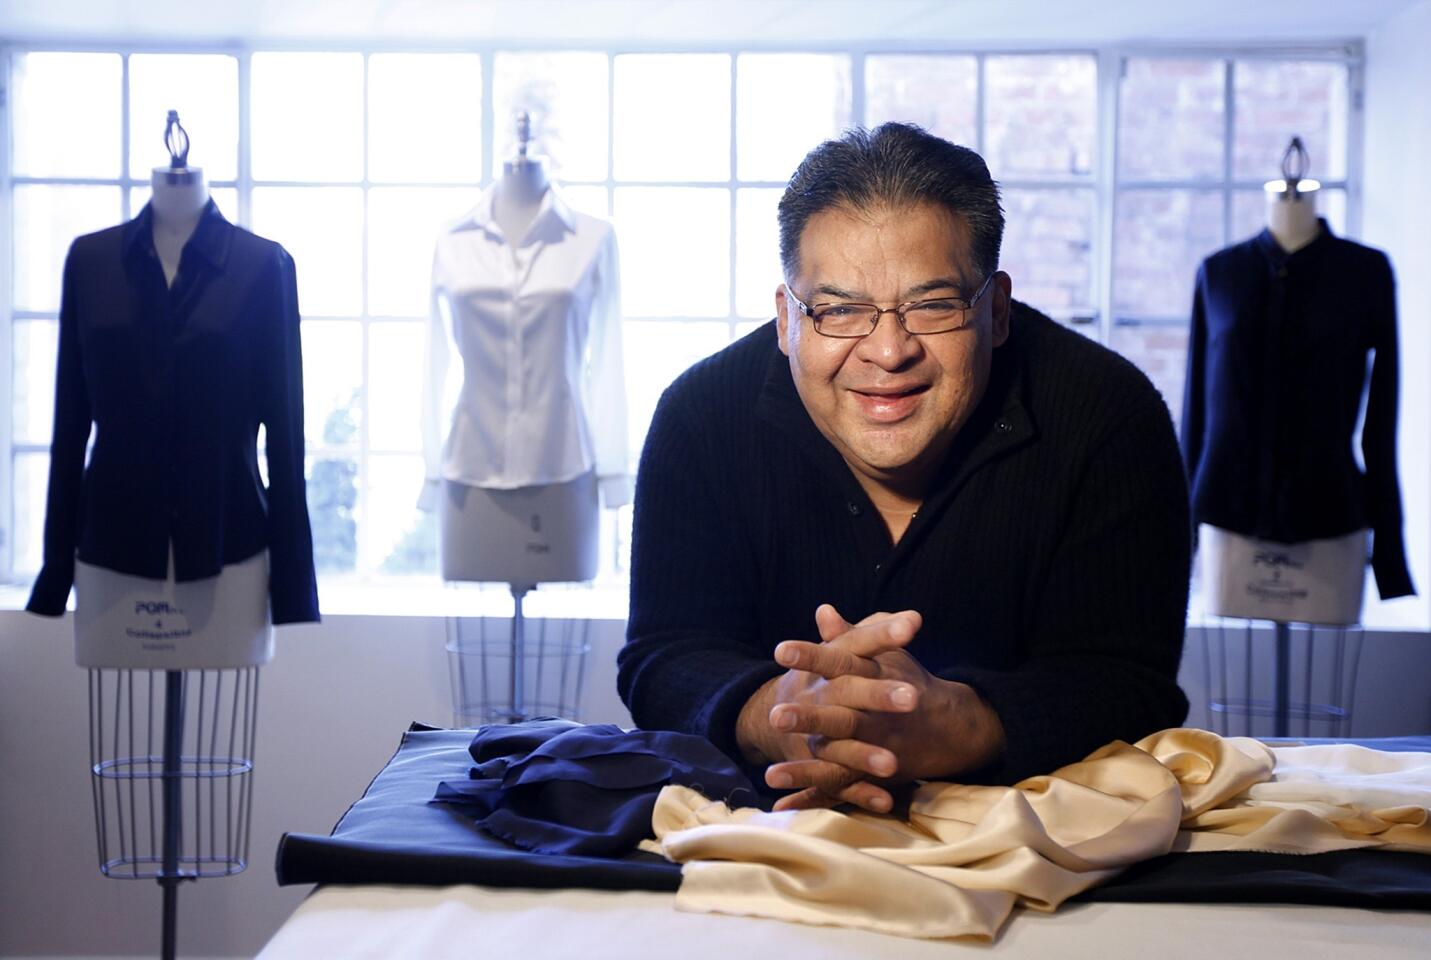 Mario Gonzales, 55, who for the last 20 years has been Hollywood's go-to tailor for awards season, shortening sleeves, showcasing butts, and preventing wardrobe malfunctions on the red carpet, is photographed at his office in Beverly Hills.